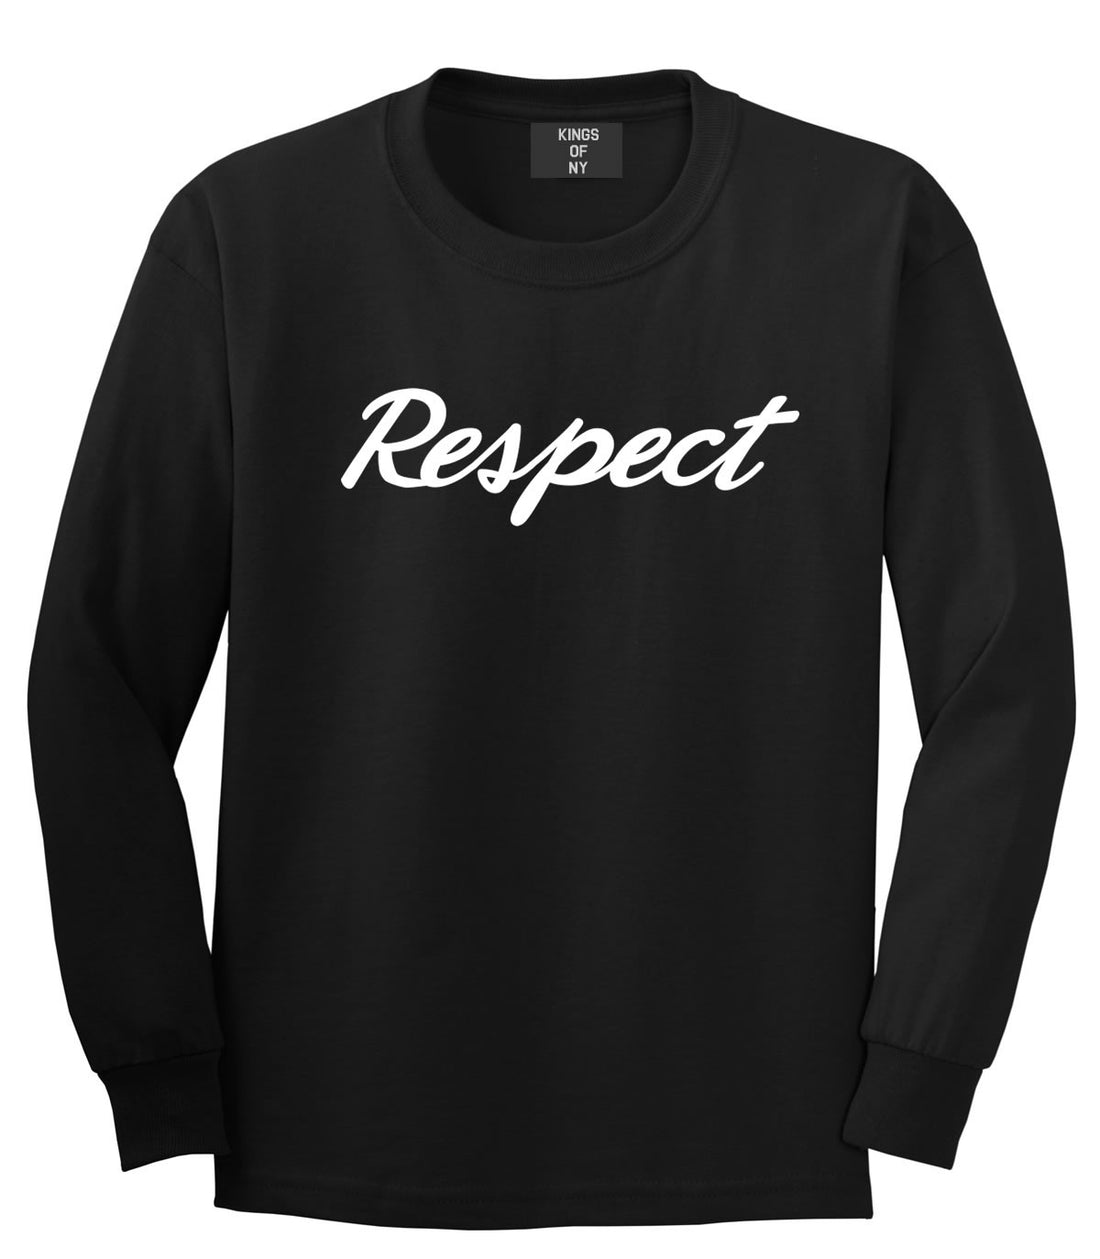 Kings Of NY Respect Long Sleeve T-Shirt in Black